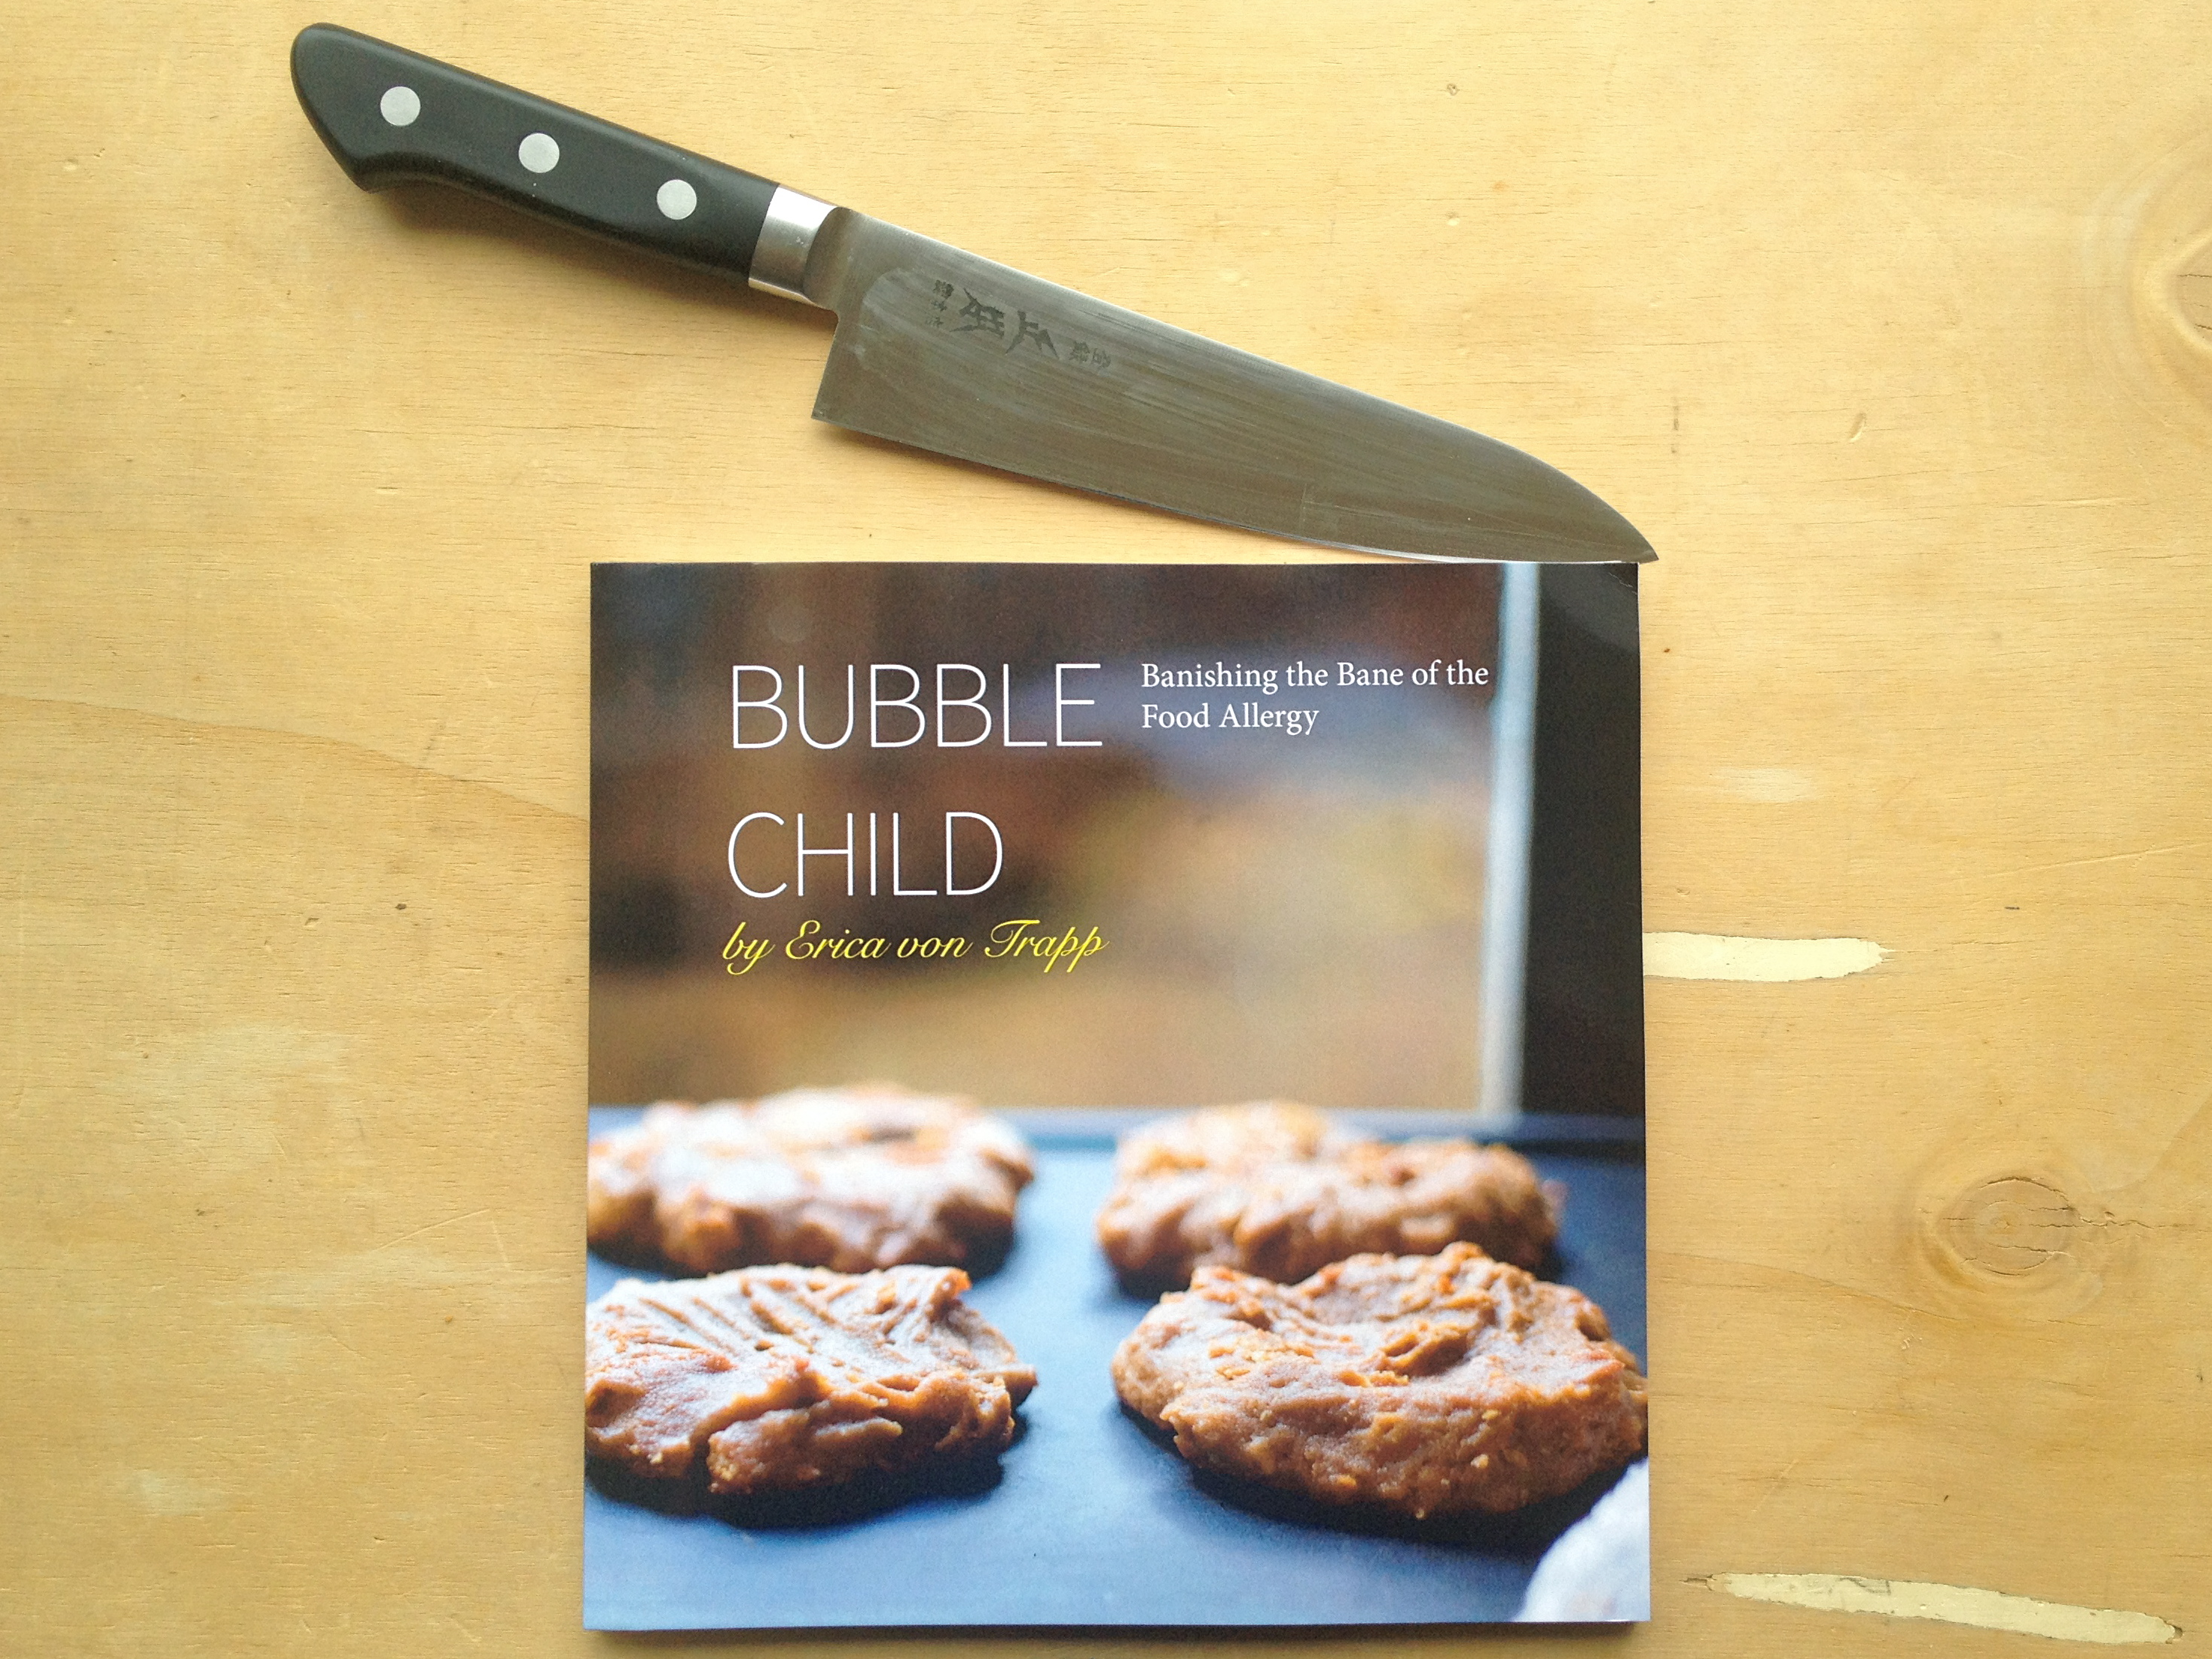 The Bubble Child cookbook coming soon to stores and Amazon.com.